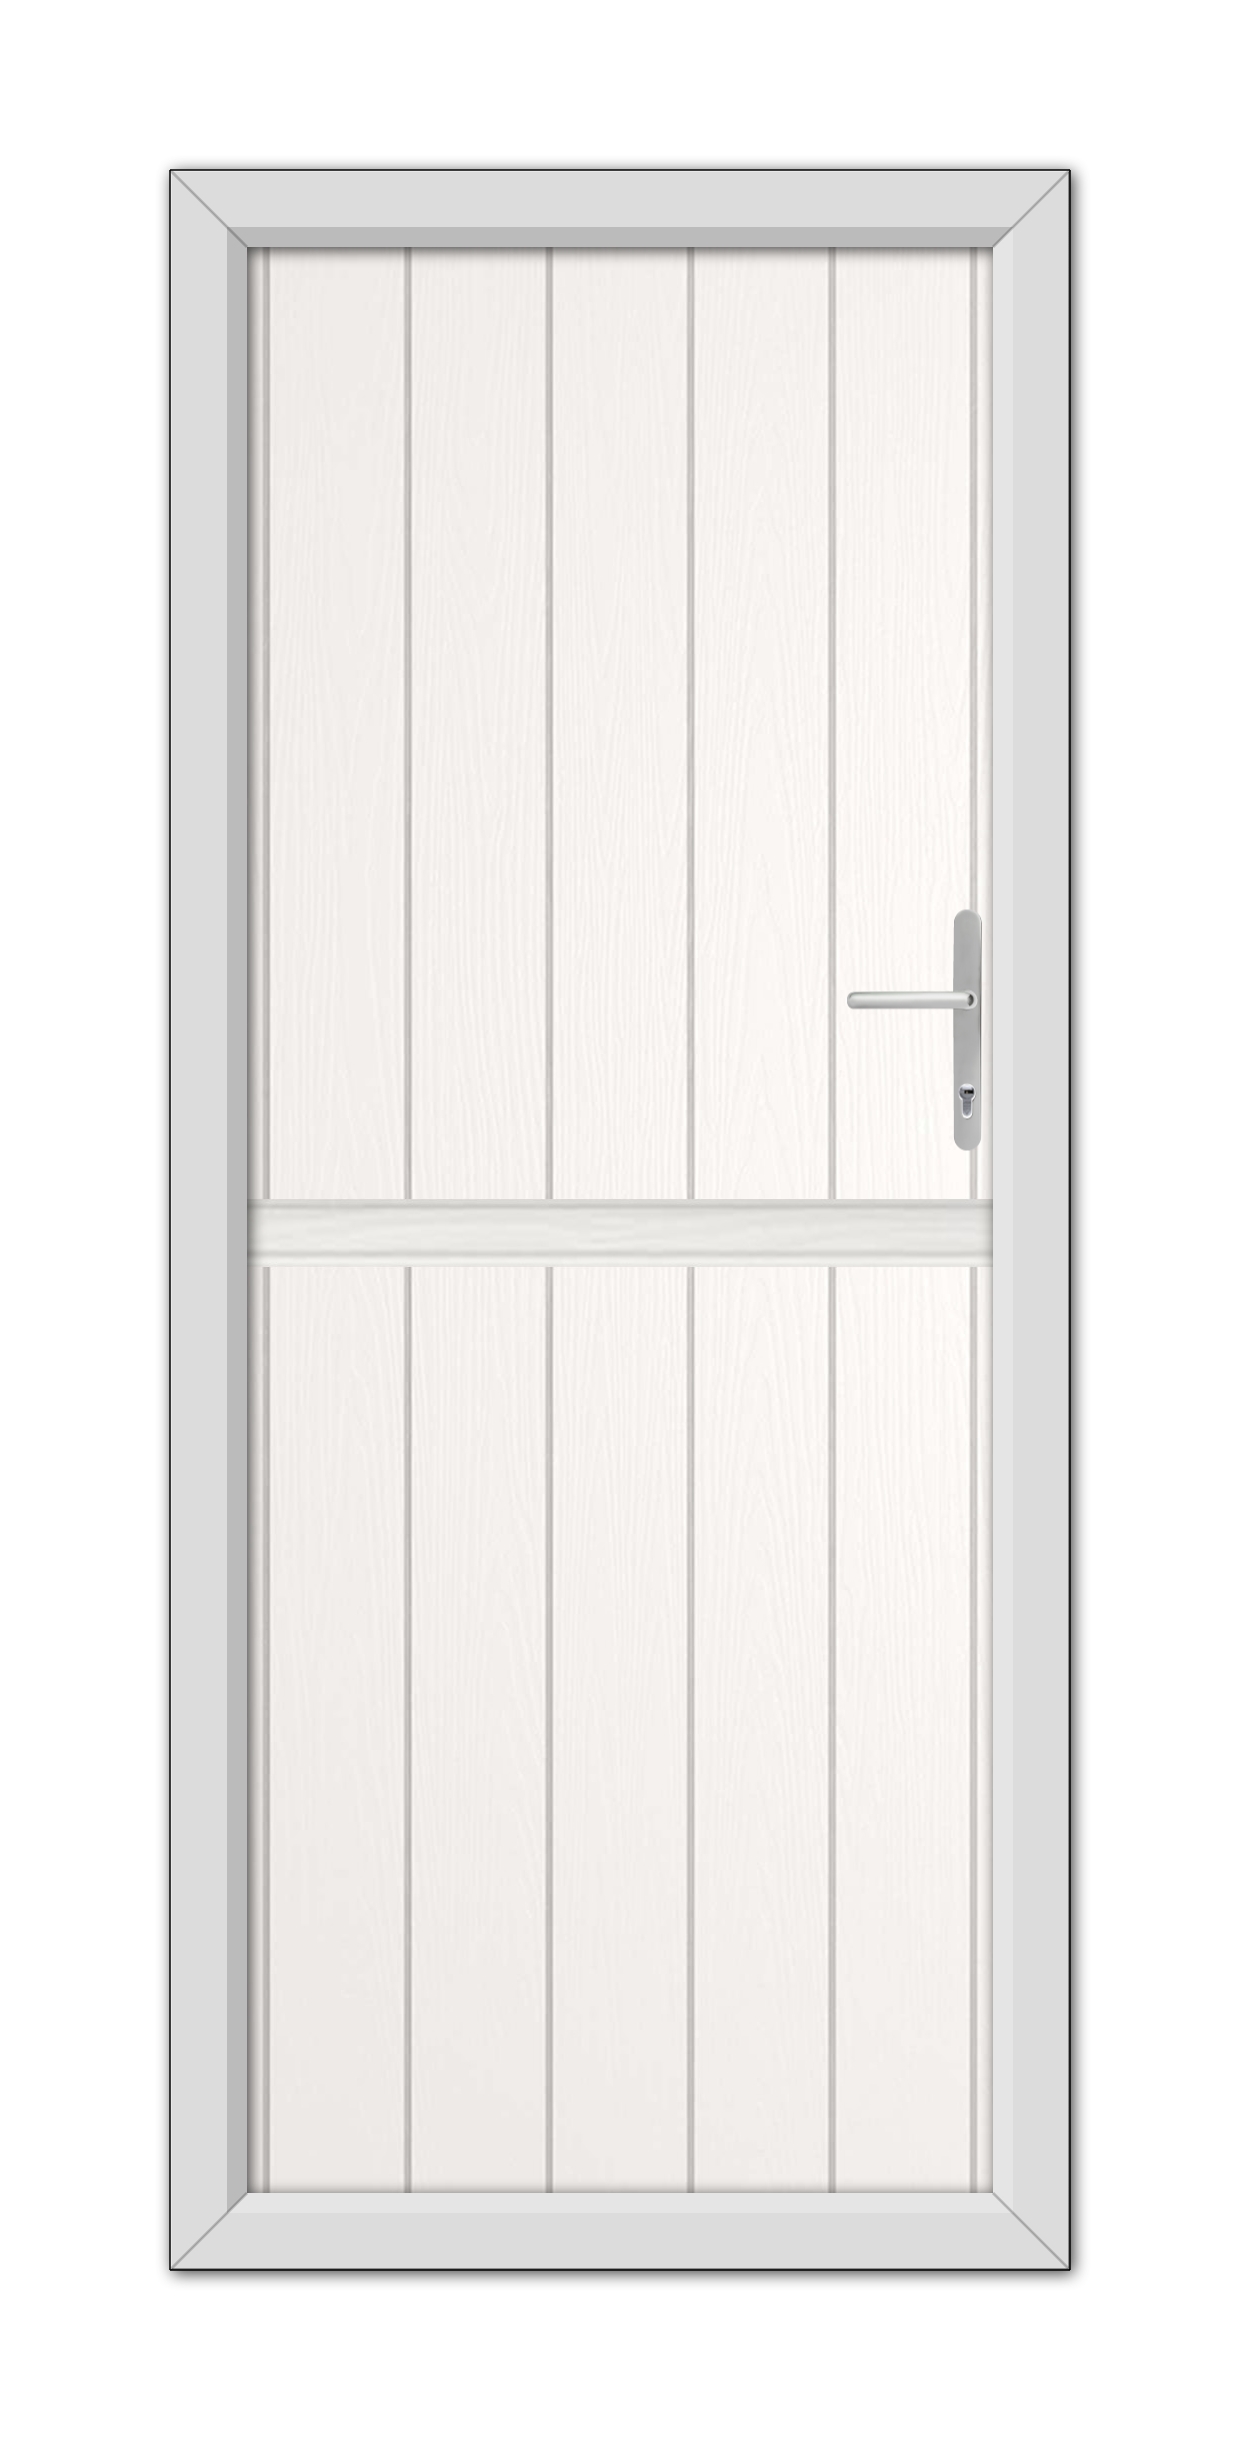 A modern White Gloucester Stable Composite Door with a horizontal window at the upper half and a metallic handle on the right side, set in a gray frame.